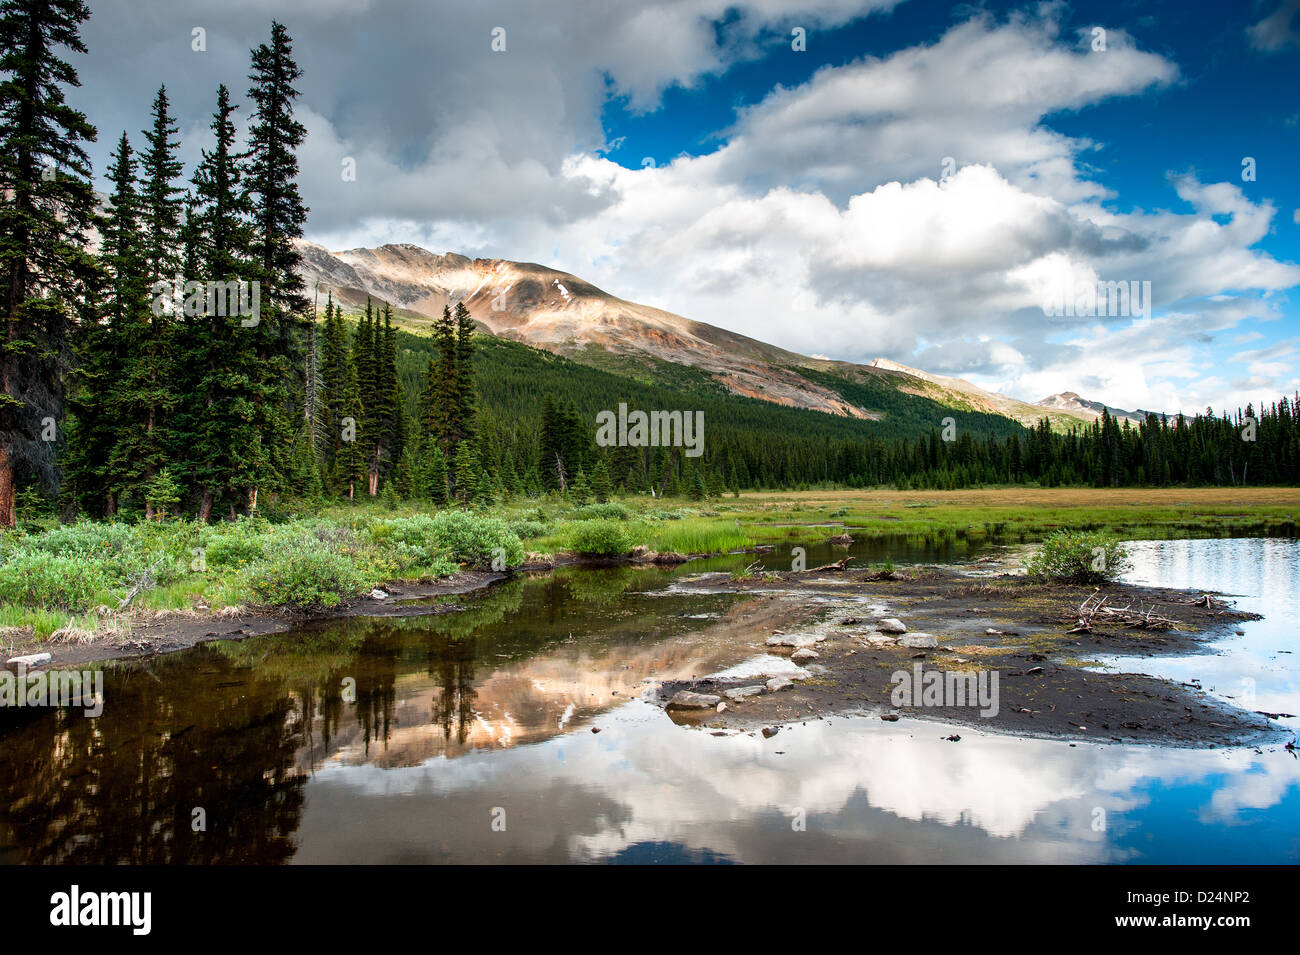 Mountain panorama with small lake at the icefield parkway in Banff national park, Alberta, Canada Stock Photo